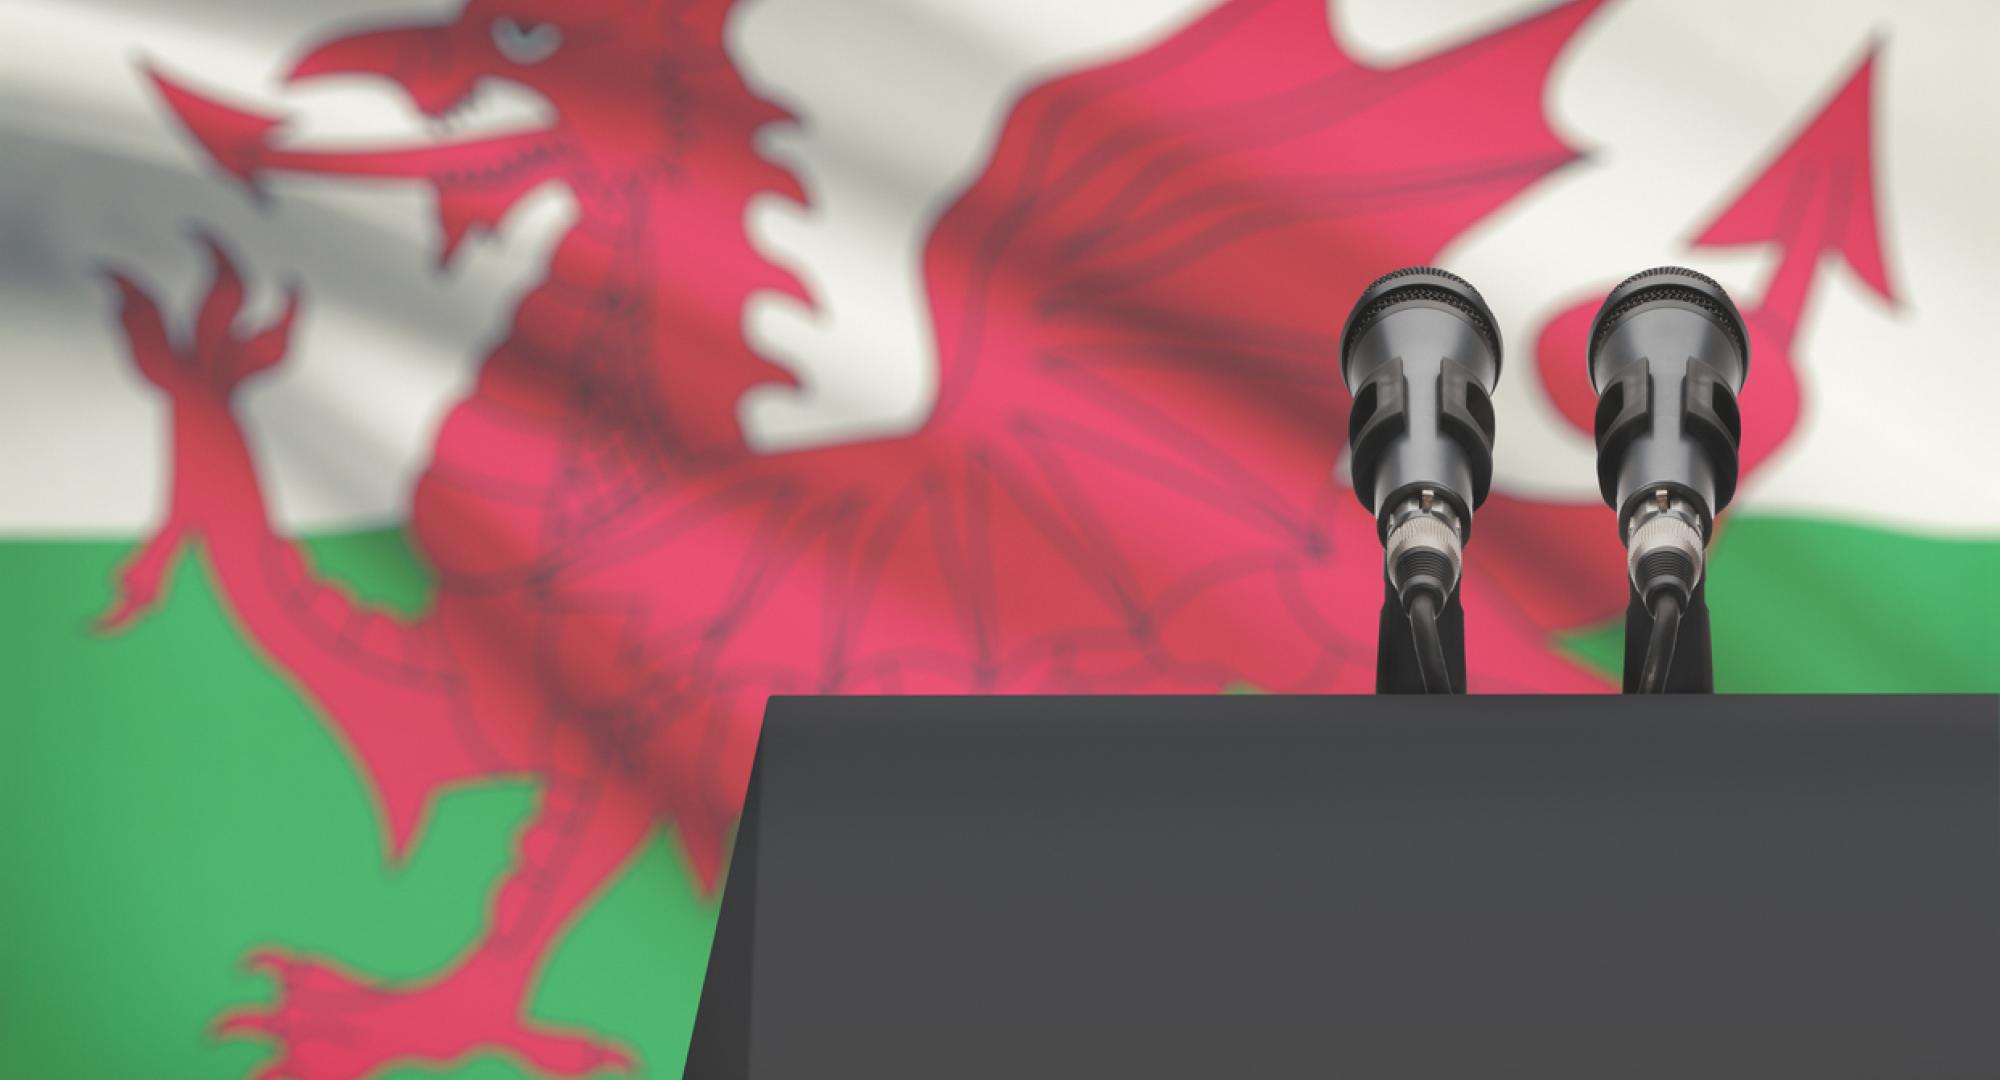 Pulpit and two microphones with a flag on background - Wales